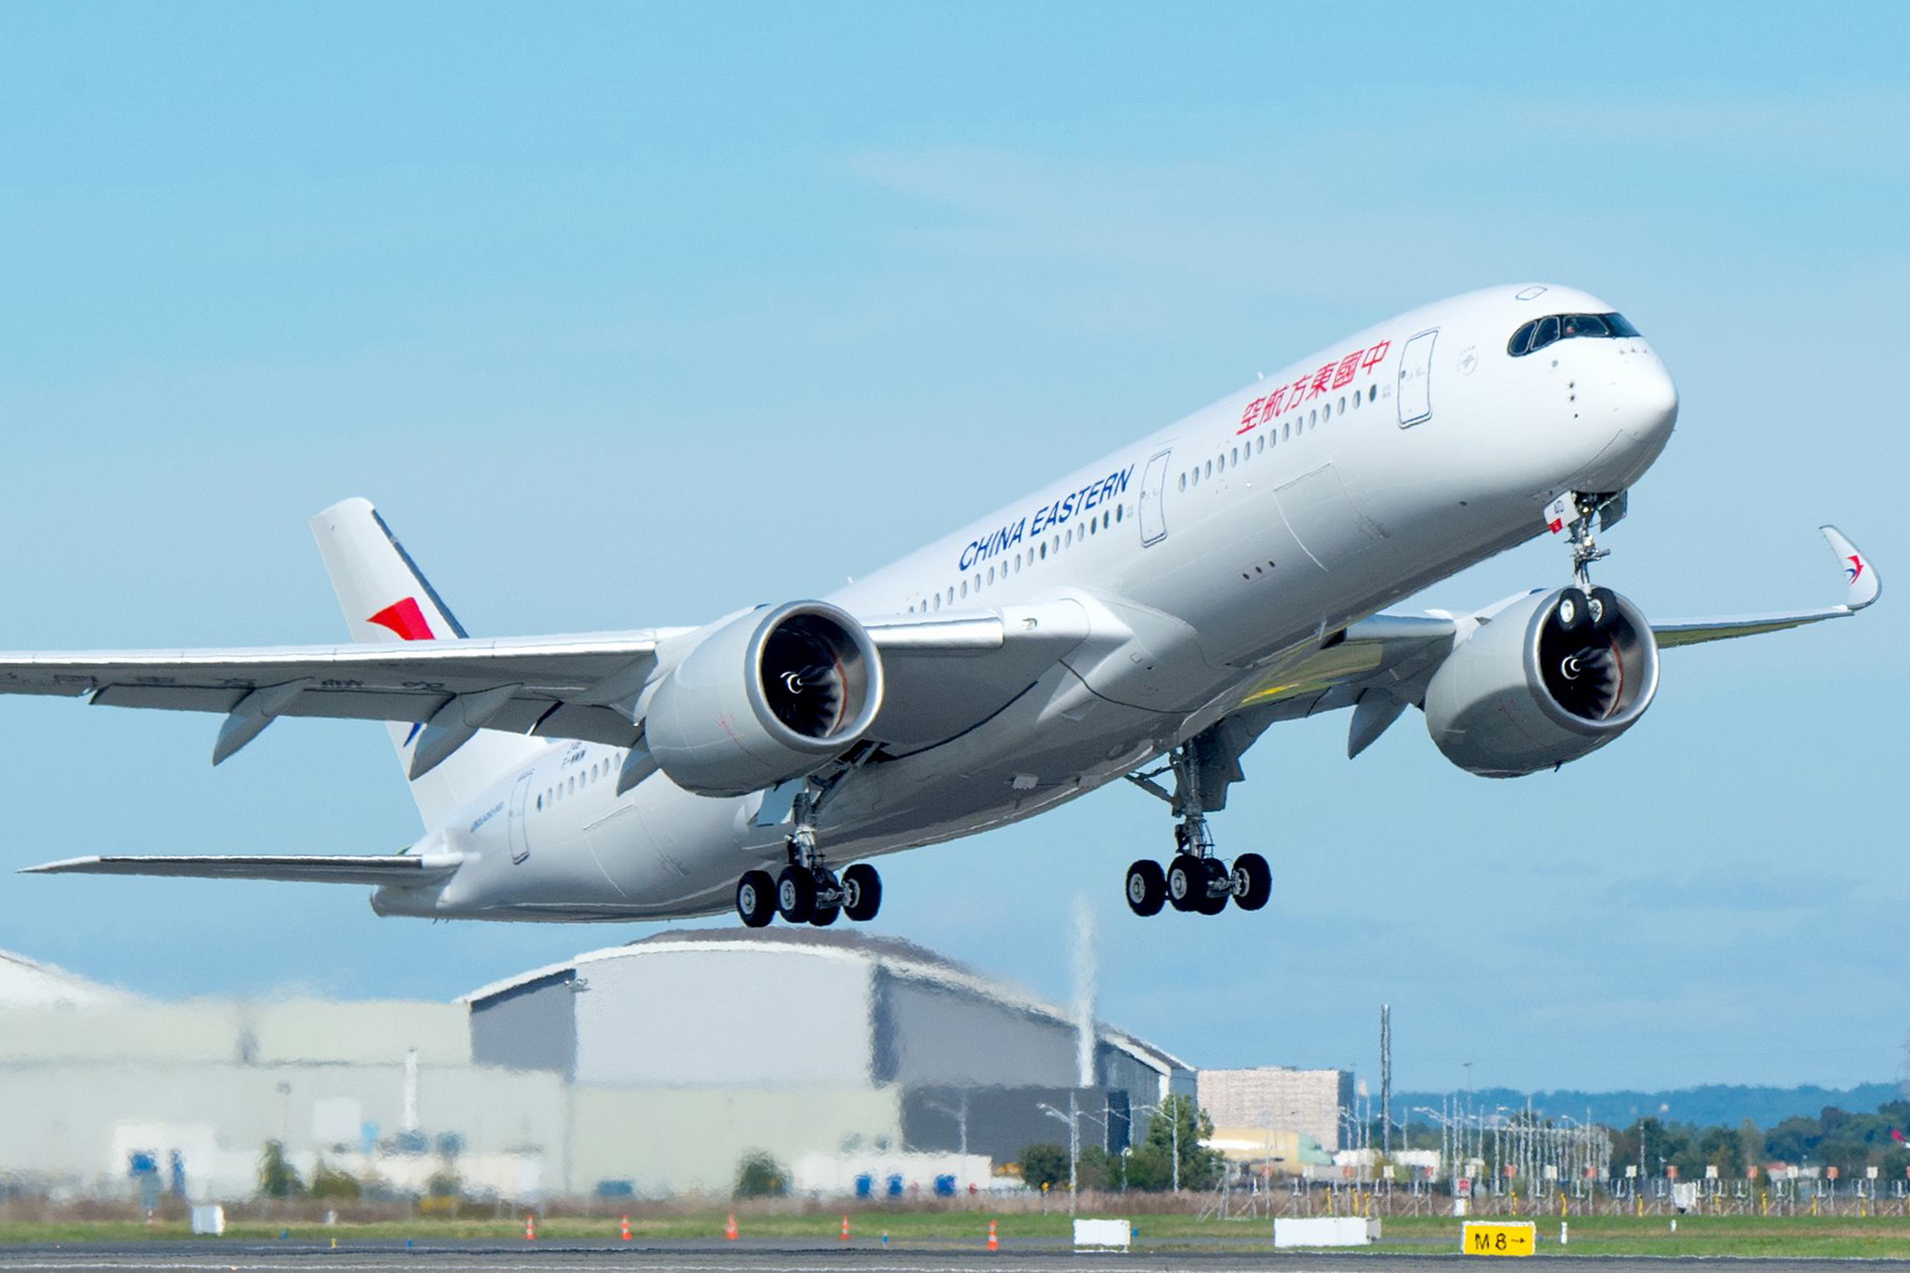 China Eastern Airlines' first Airbus A350-900 has performed its maiden flight in Toulouse, France. The aircraft now enters the final phase of production, ground checks and test flights before being prepared for delivery in the coming weeks. China Eastern has 20 Airbus A350-900s on order.. Click to enlarge.